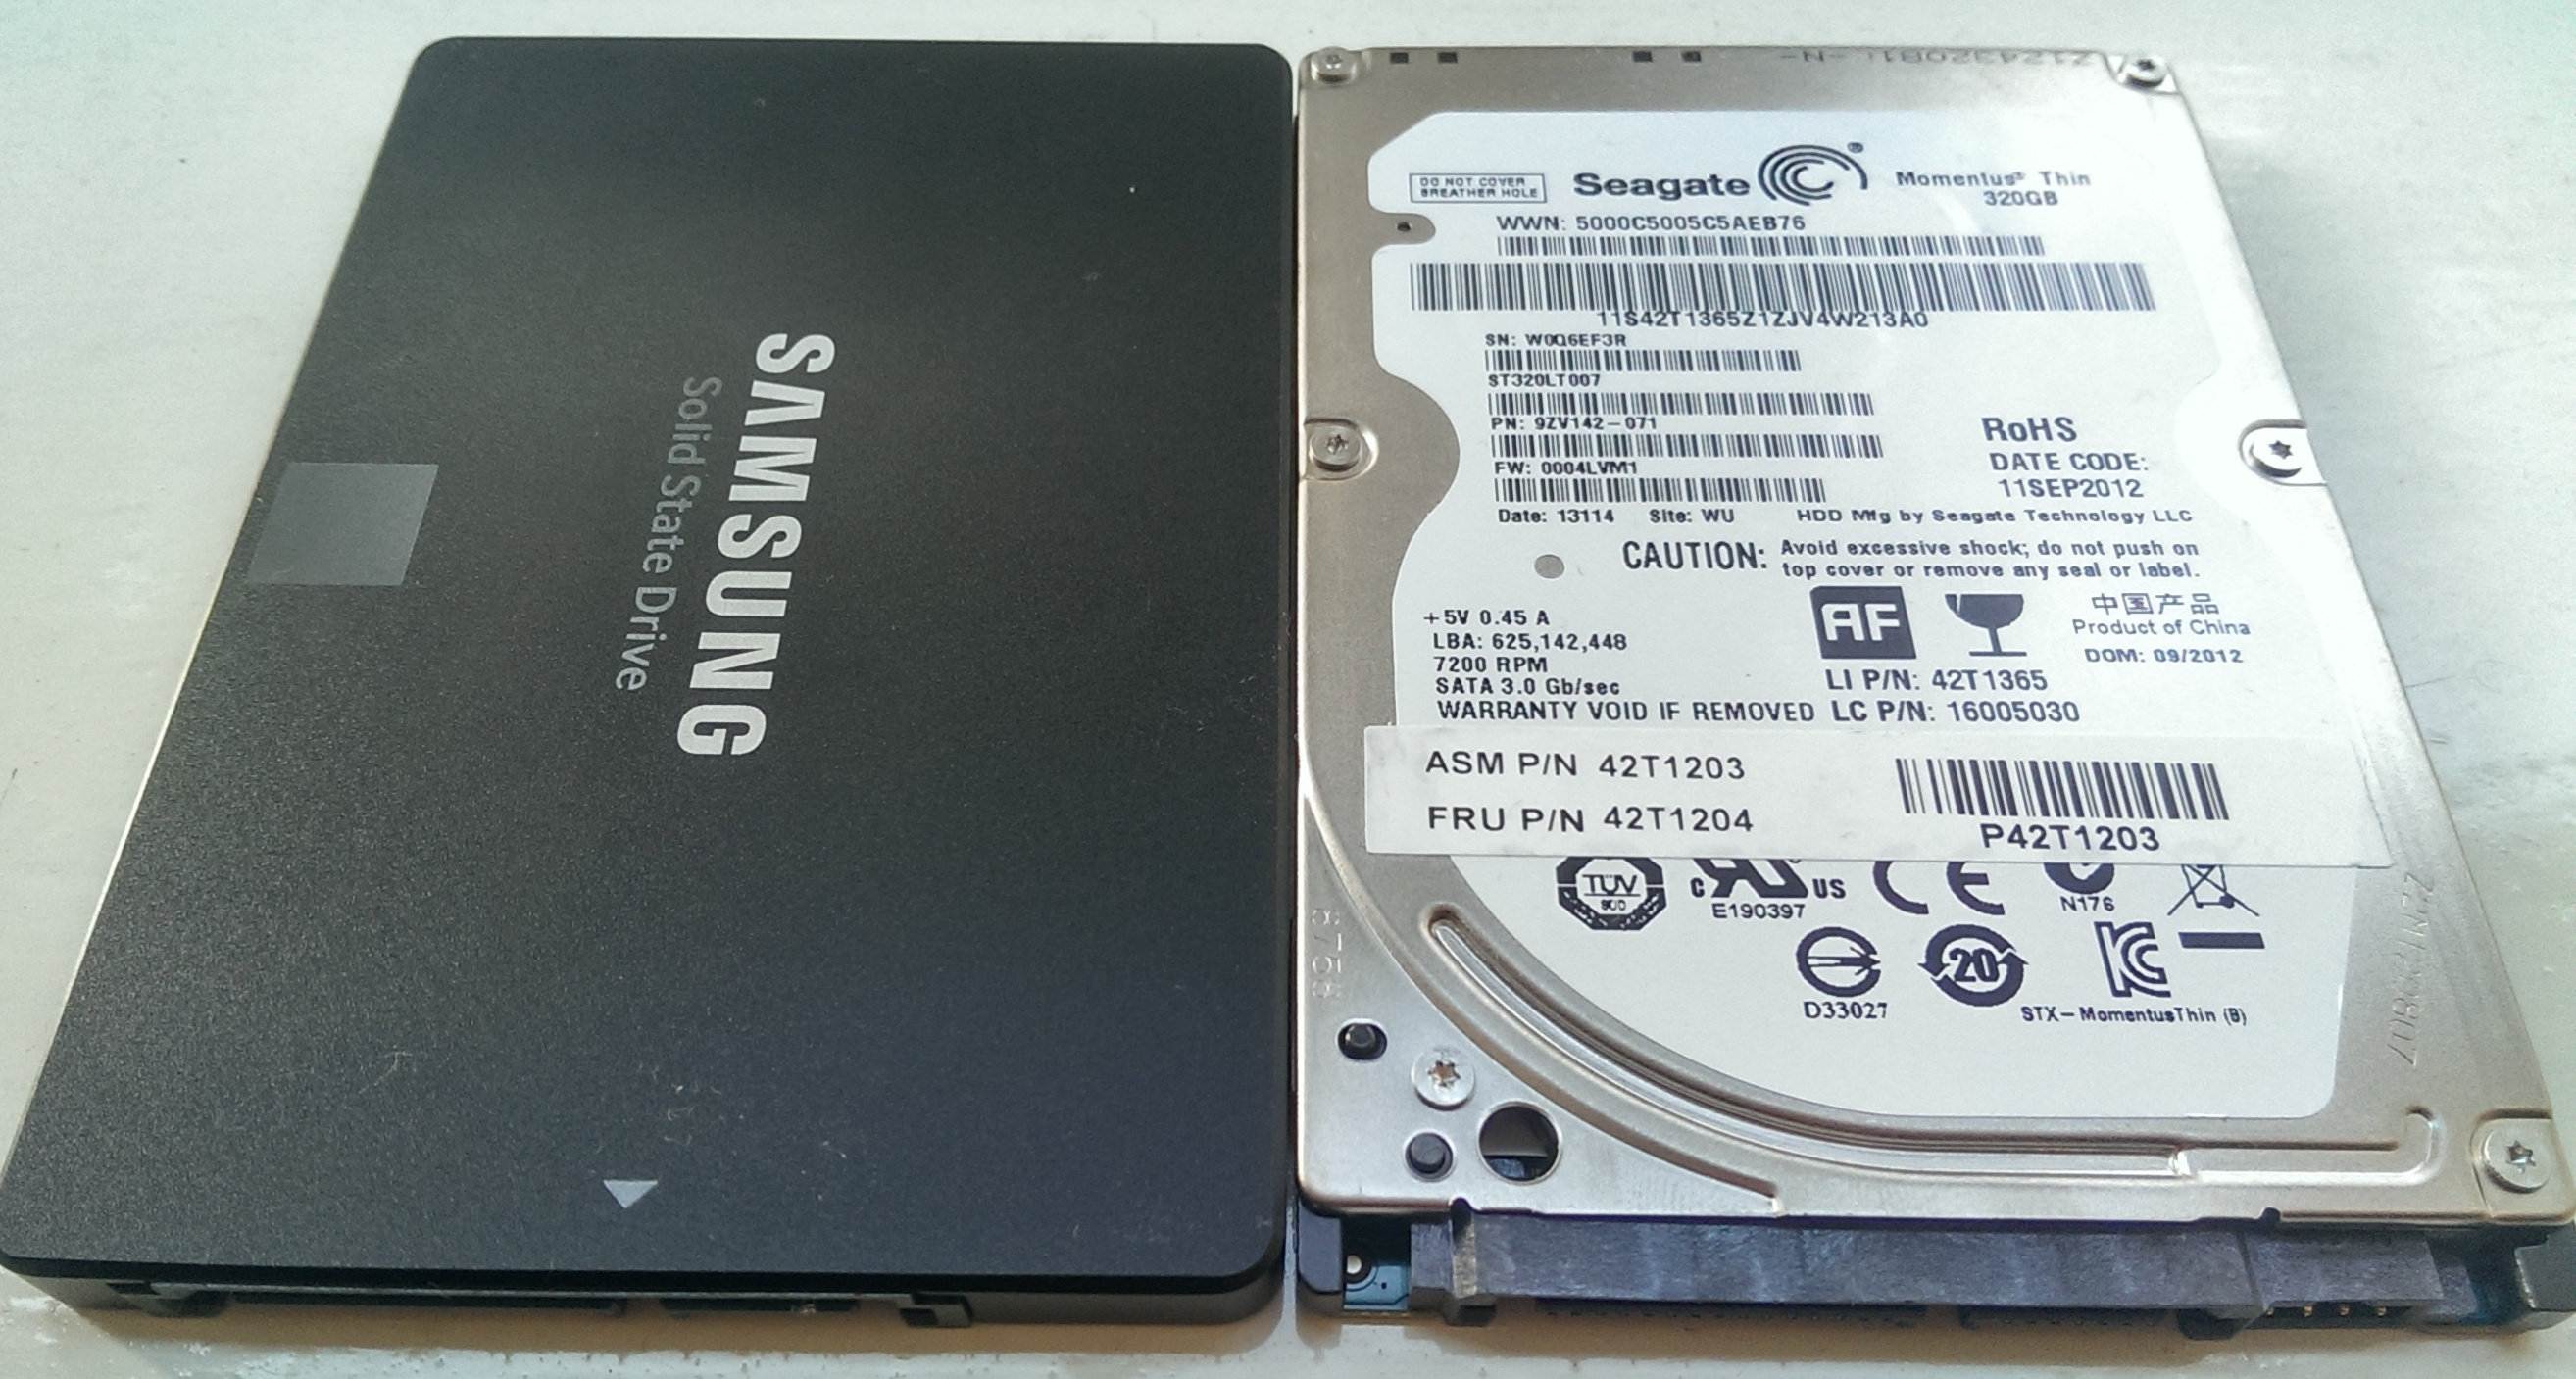 The old 320 GB hard drive, alongside the new Samsung 850 EVO solid-state drive.